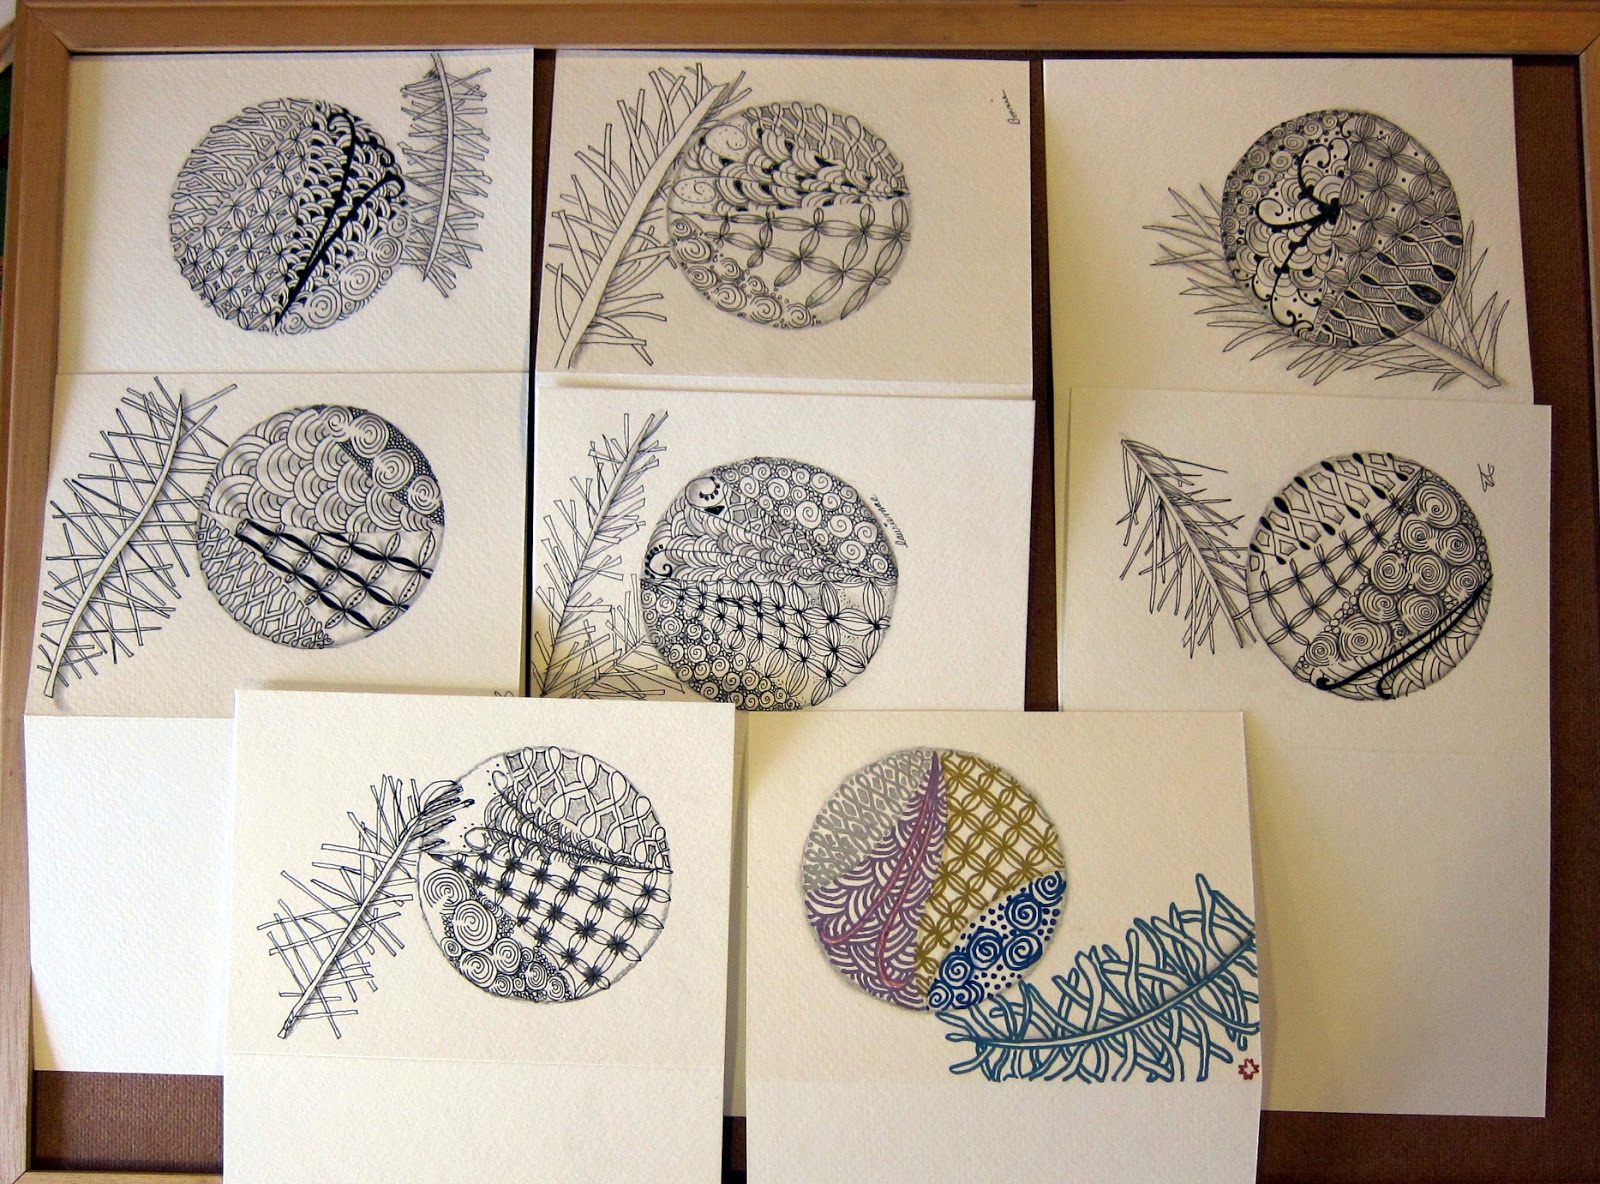 What to bring on vacation: travel light with your Zentangle